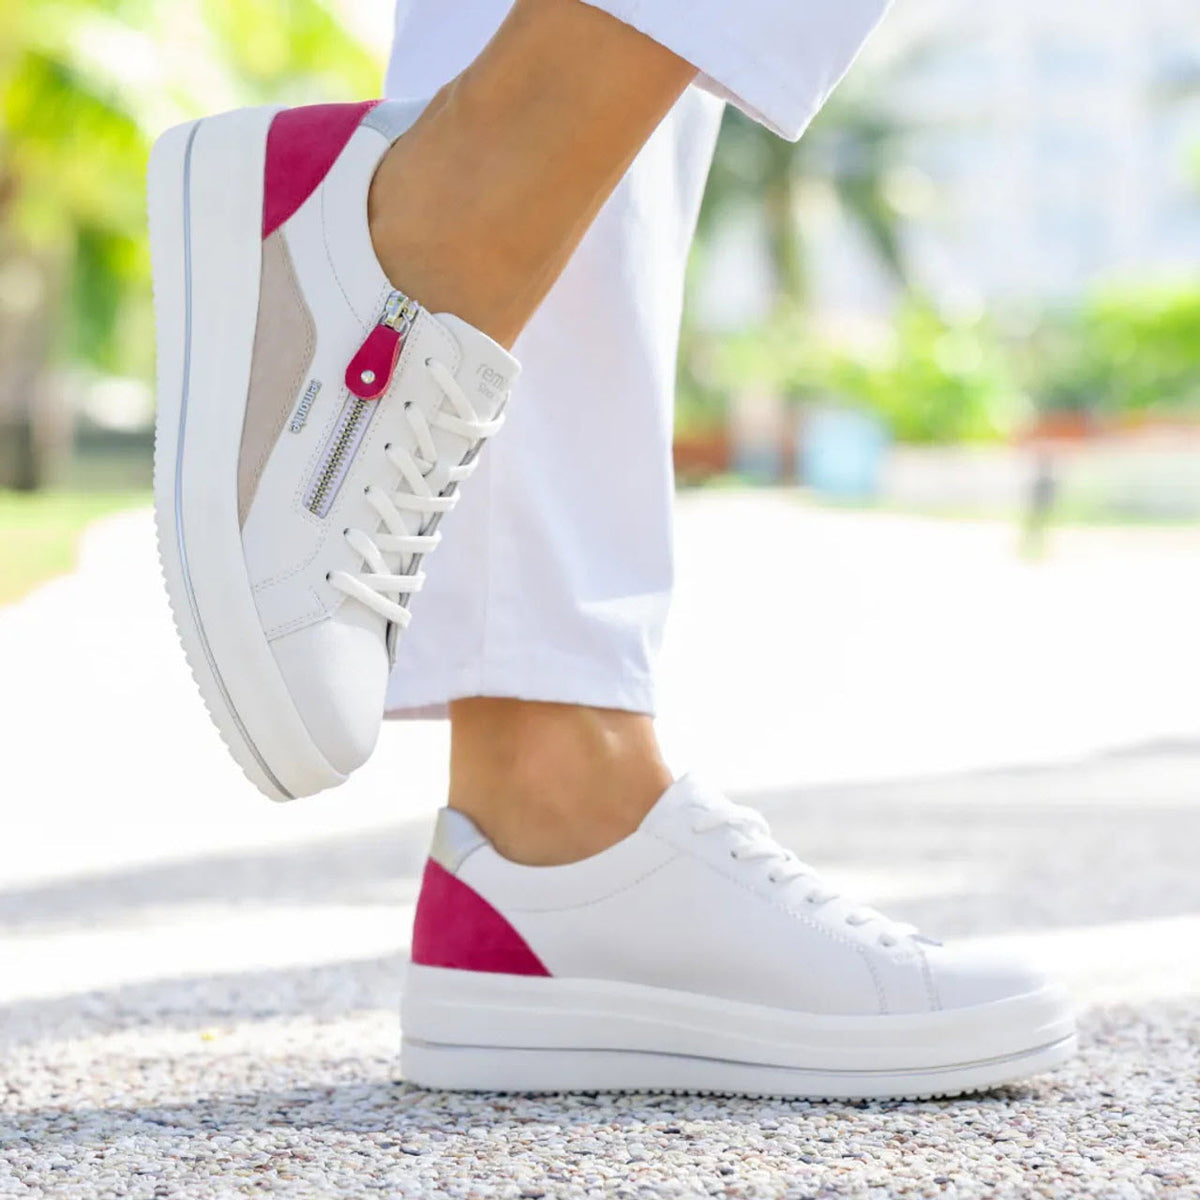 A person wearing white sneakers with pink accents, possibly the Remonte REMONTE EURO COURT SNEAKER FUCHSIA MULTI - WOMENS, and white pants stands and poses outdoors on a sunny day.